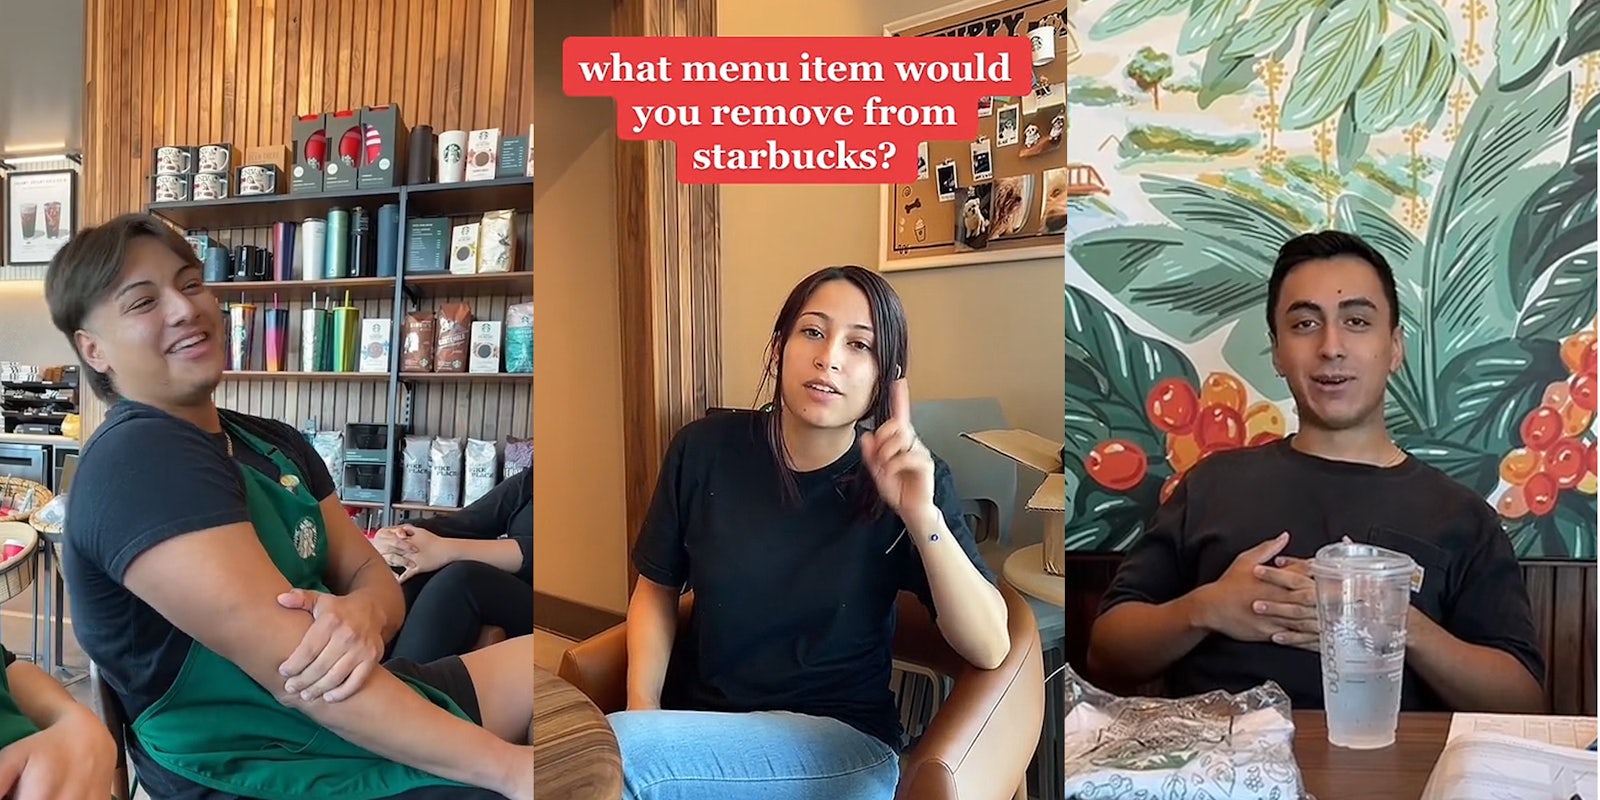 Starbucks barista sitting in chair speaking (l) Starbucks barista sitting pointing finger up at caption 'what menu item would you remove from starbucks?' (c) Starbucks barista sitting in booth speaking (r)